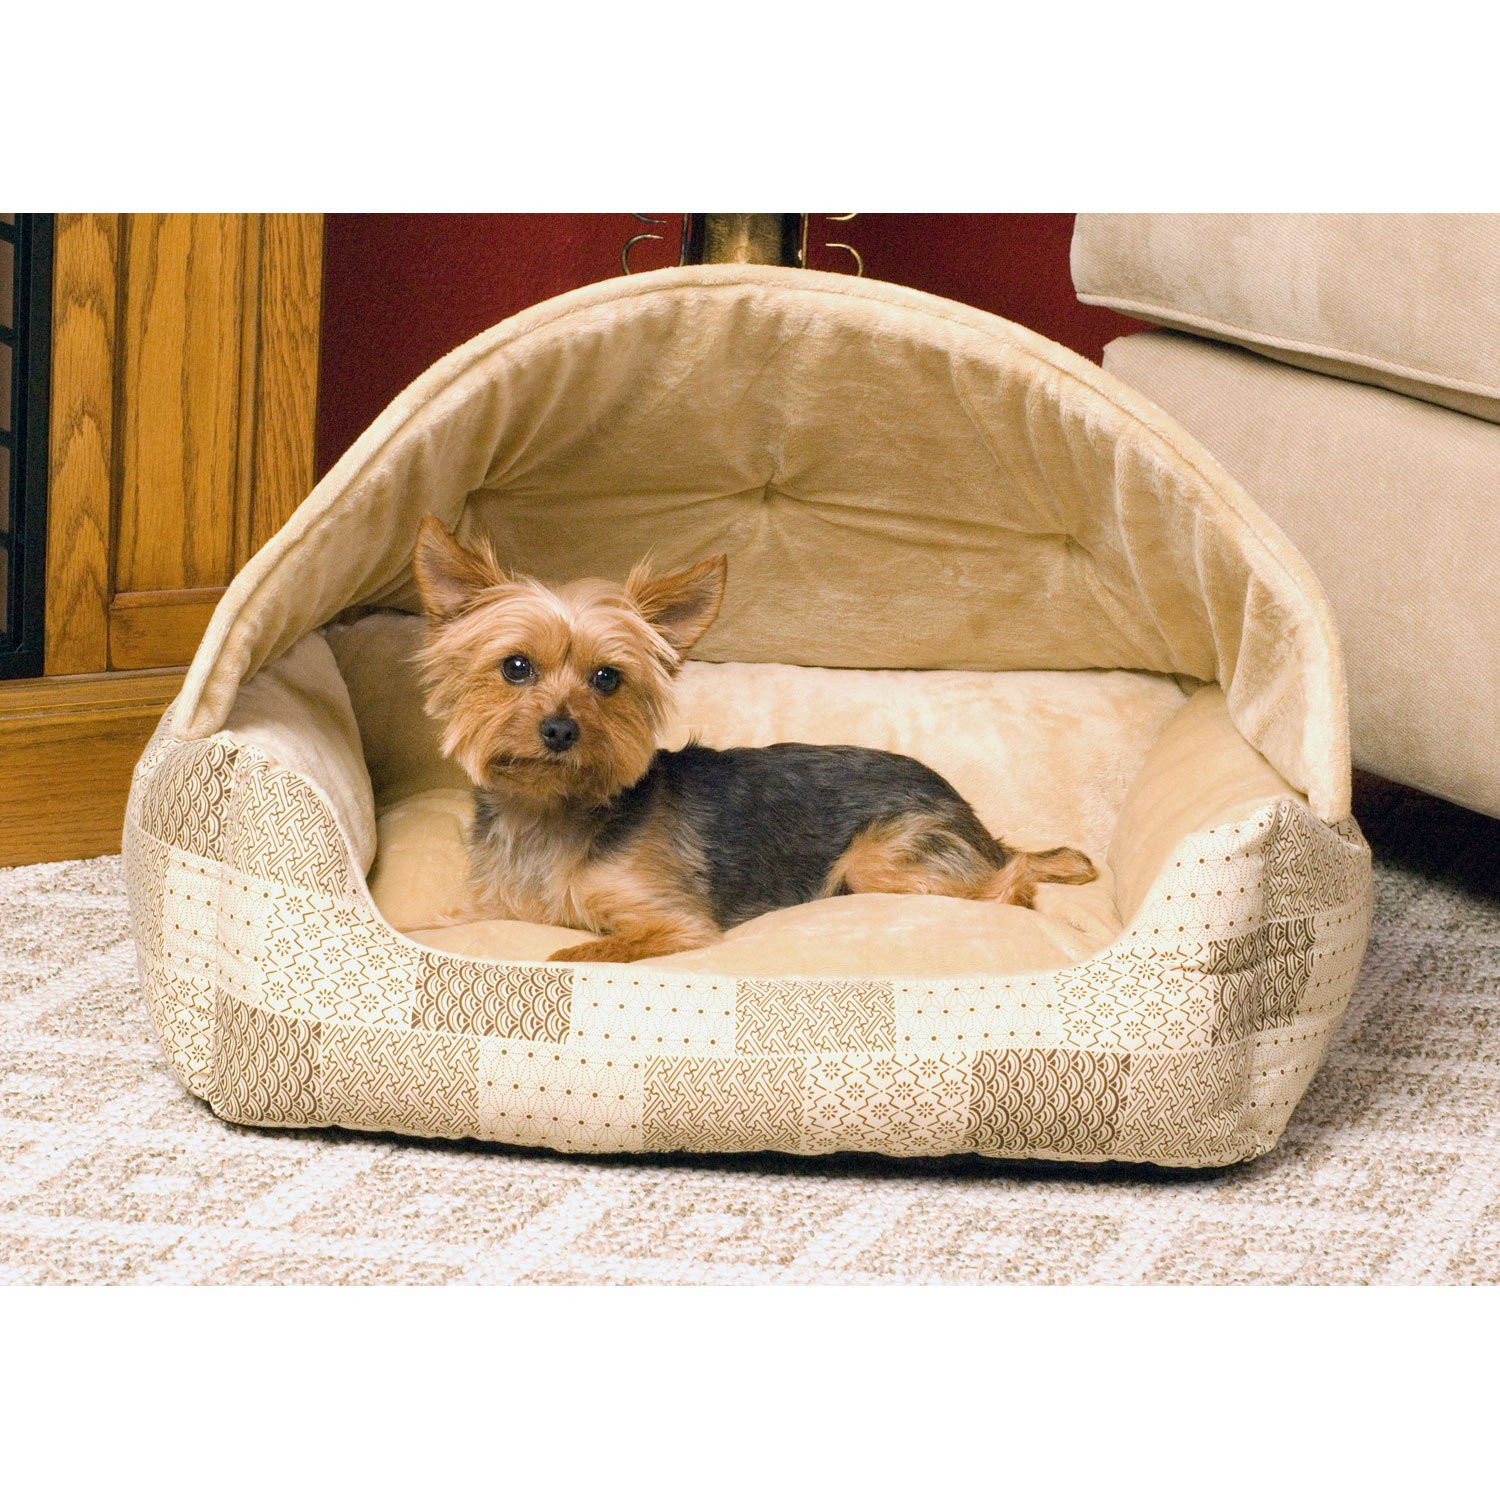 DIY Hooded Dog Bed
 K&H Lounge Sleeper Hooded Pet Bed in Tan Patchwork